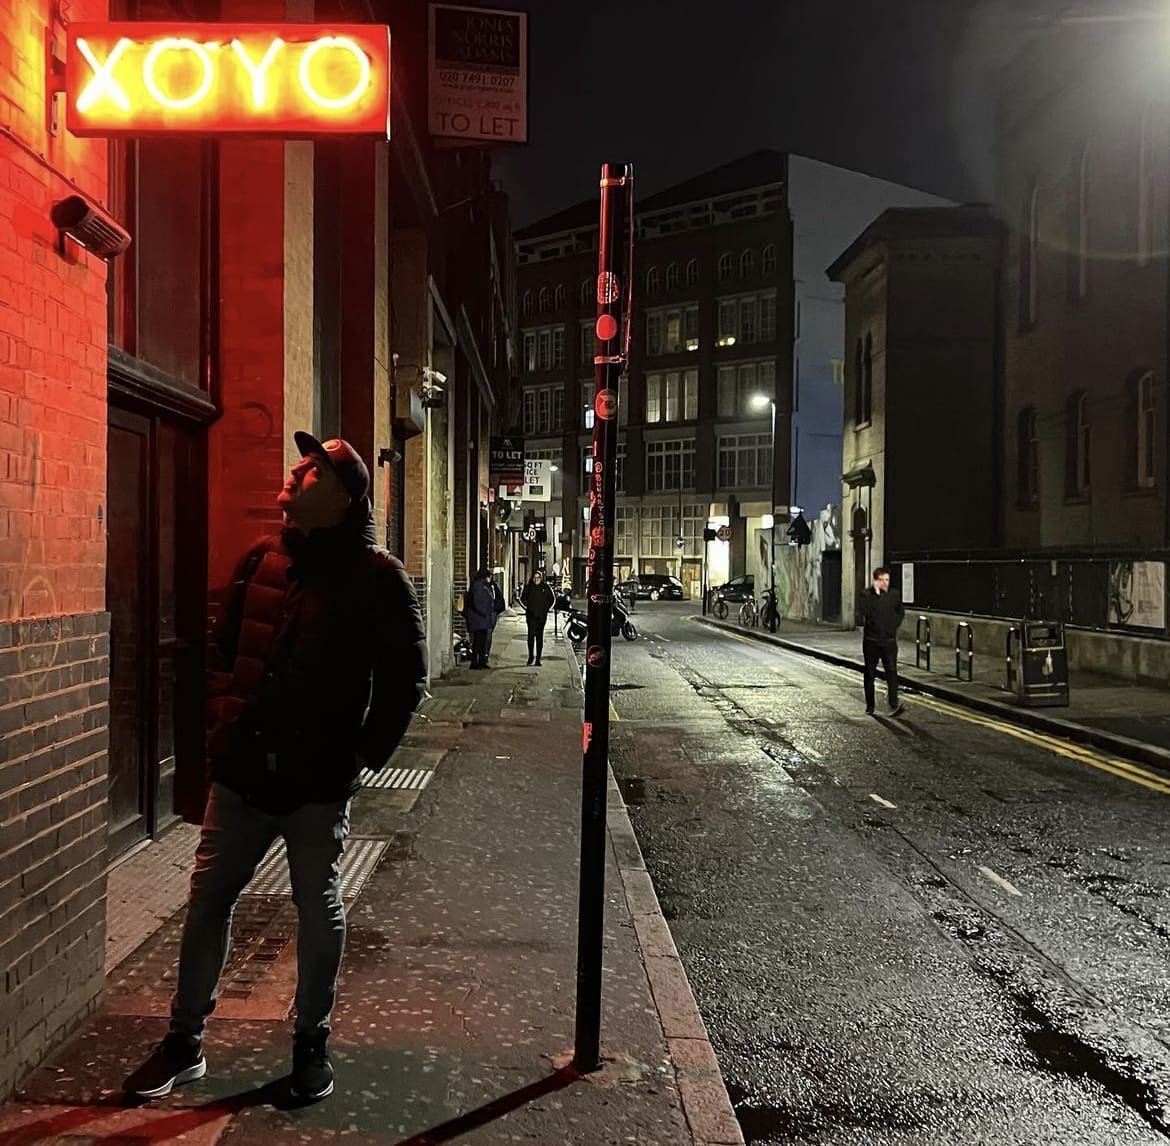 XOYO - The Best Night Clubs in London